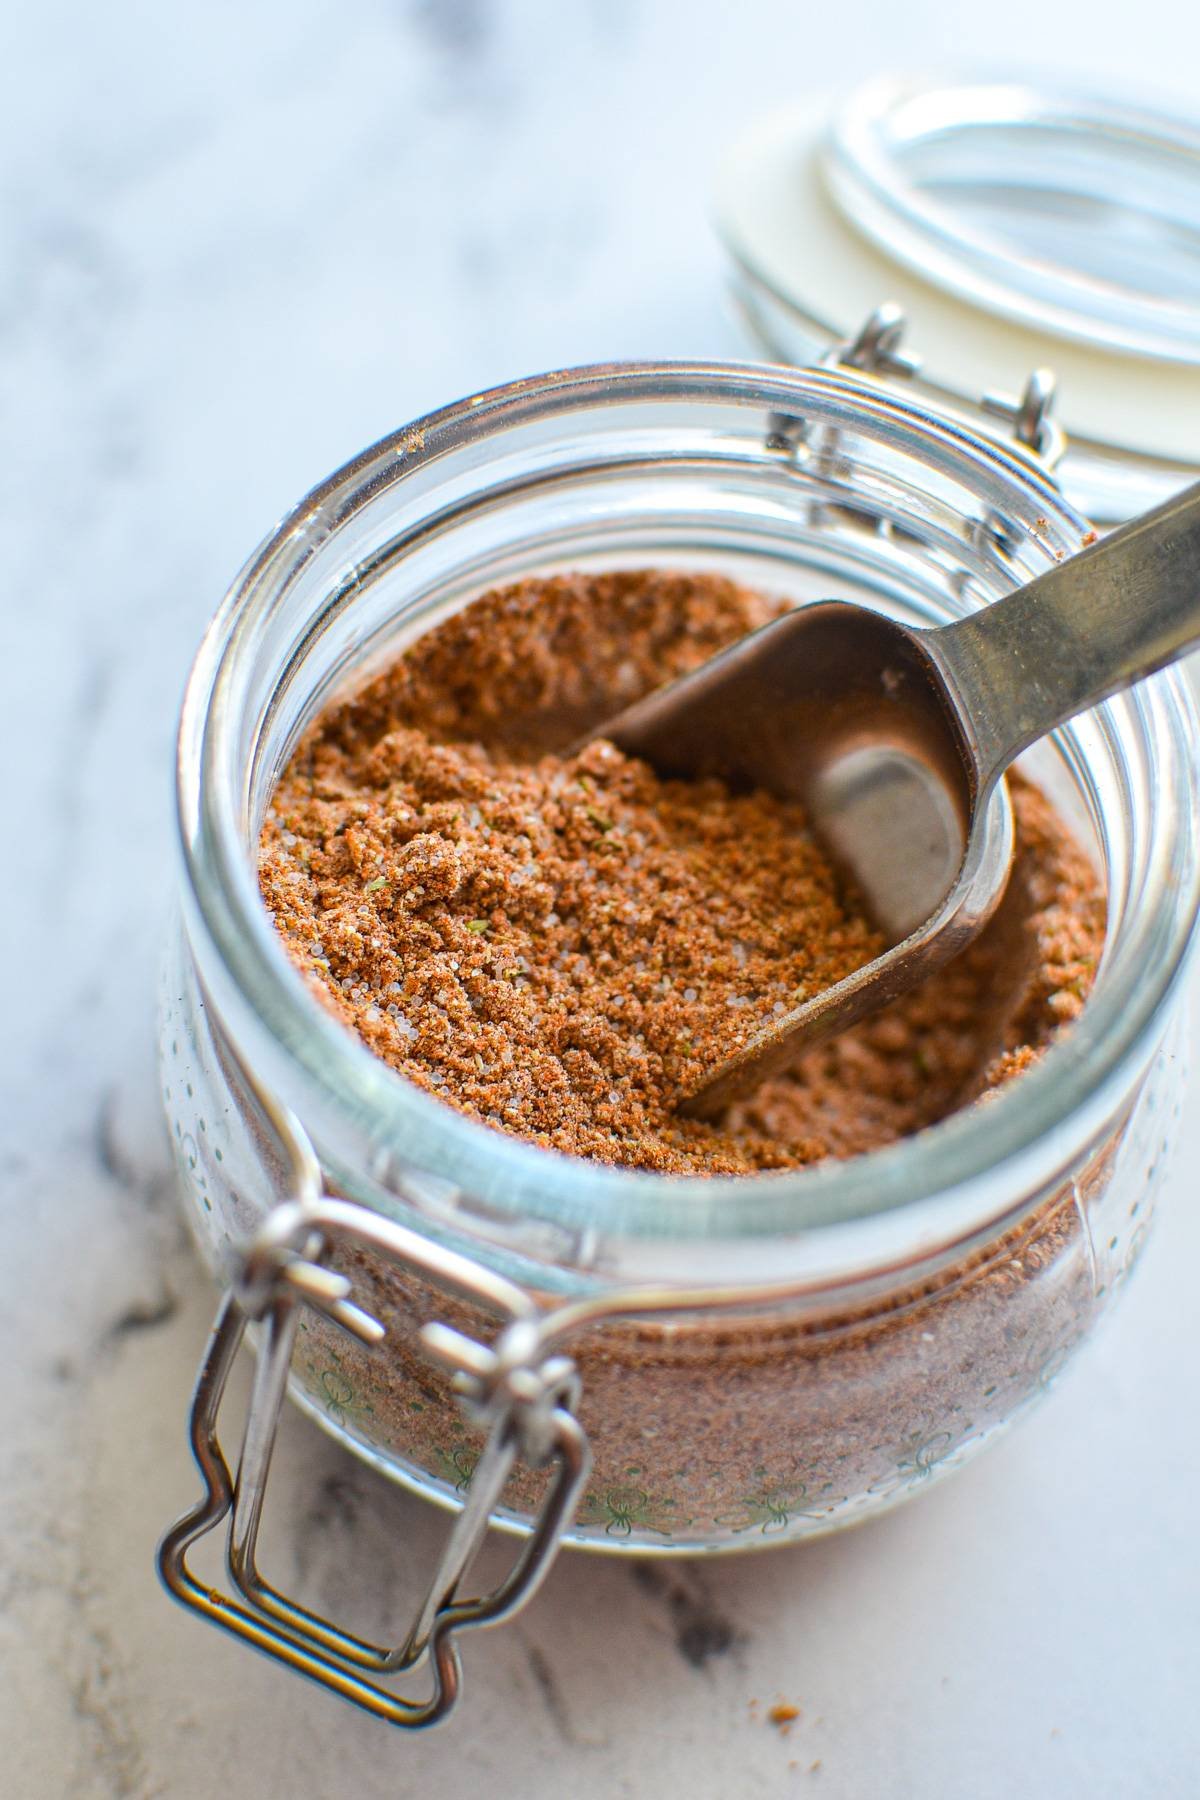 A small jar of taco seasoning with a measuring spoon inside.